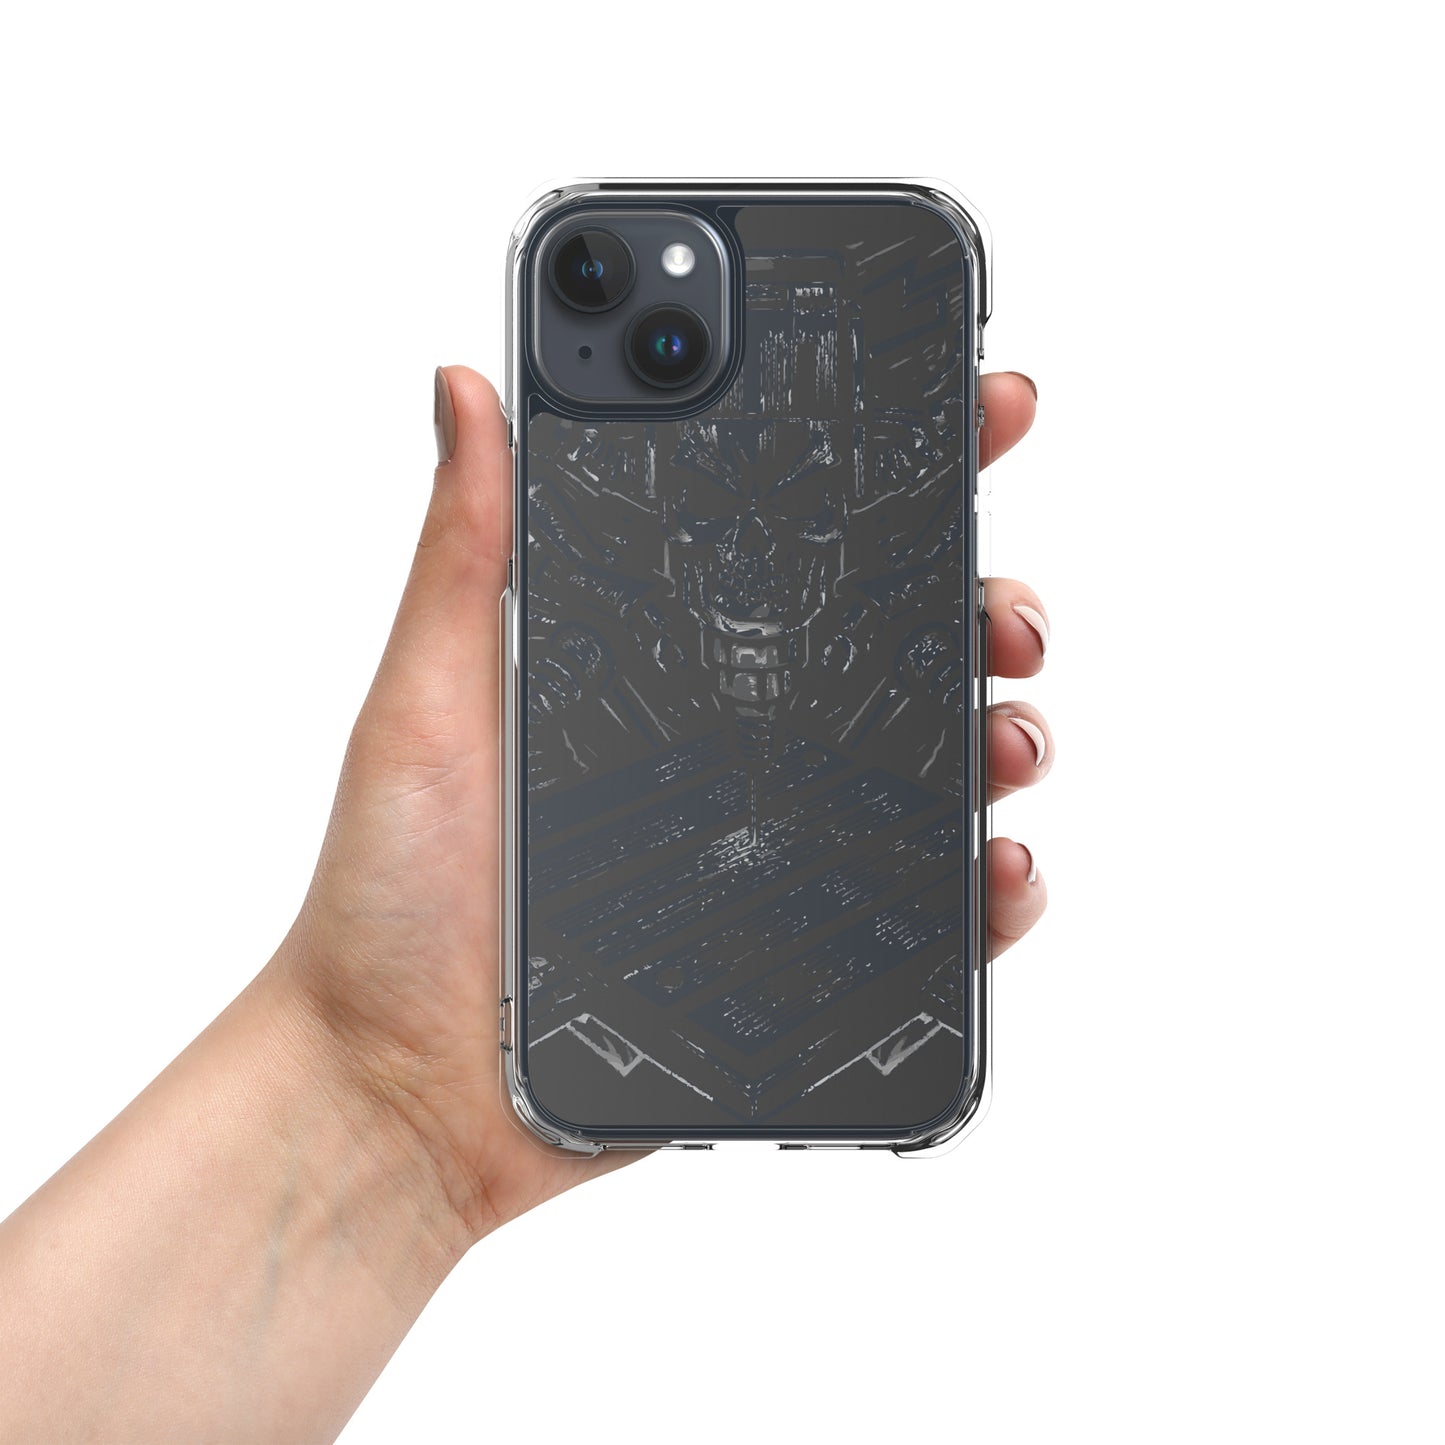 Mean Mill iPhone case